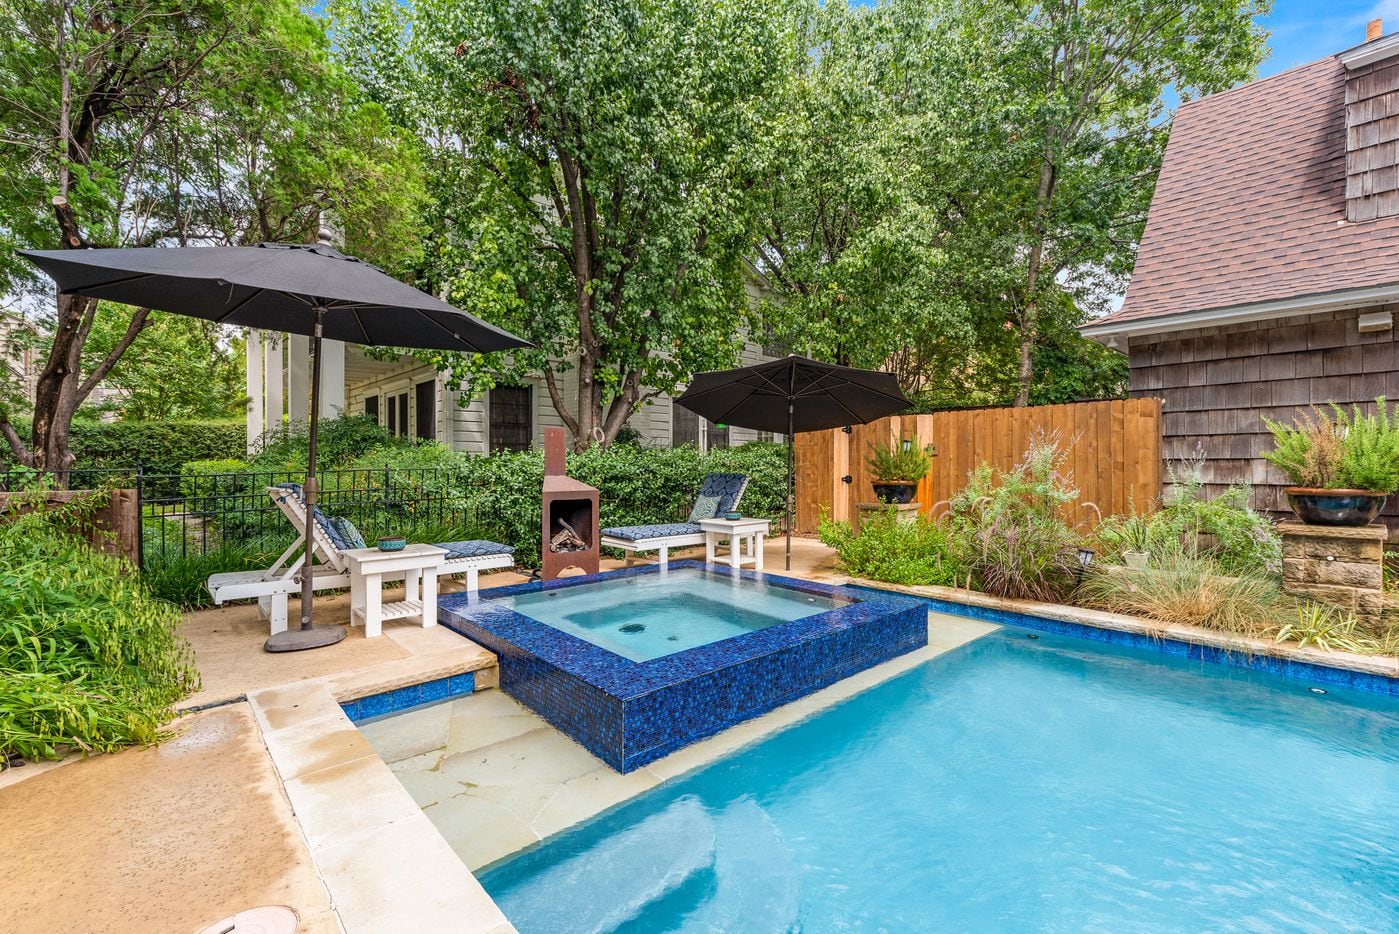 A look at 606 Blaylock Drive in Dallas, one of the houses on the 2019 Heritage Oak Cliff...